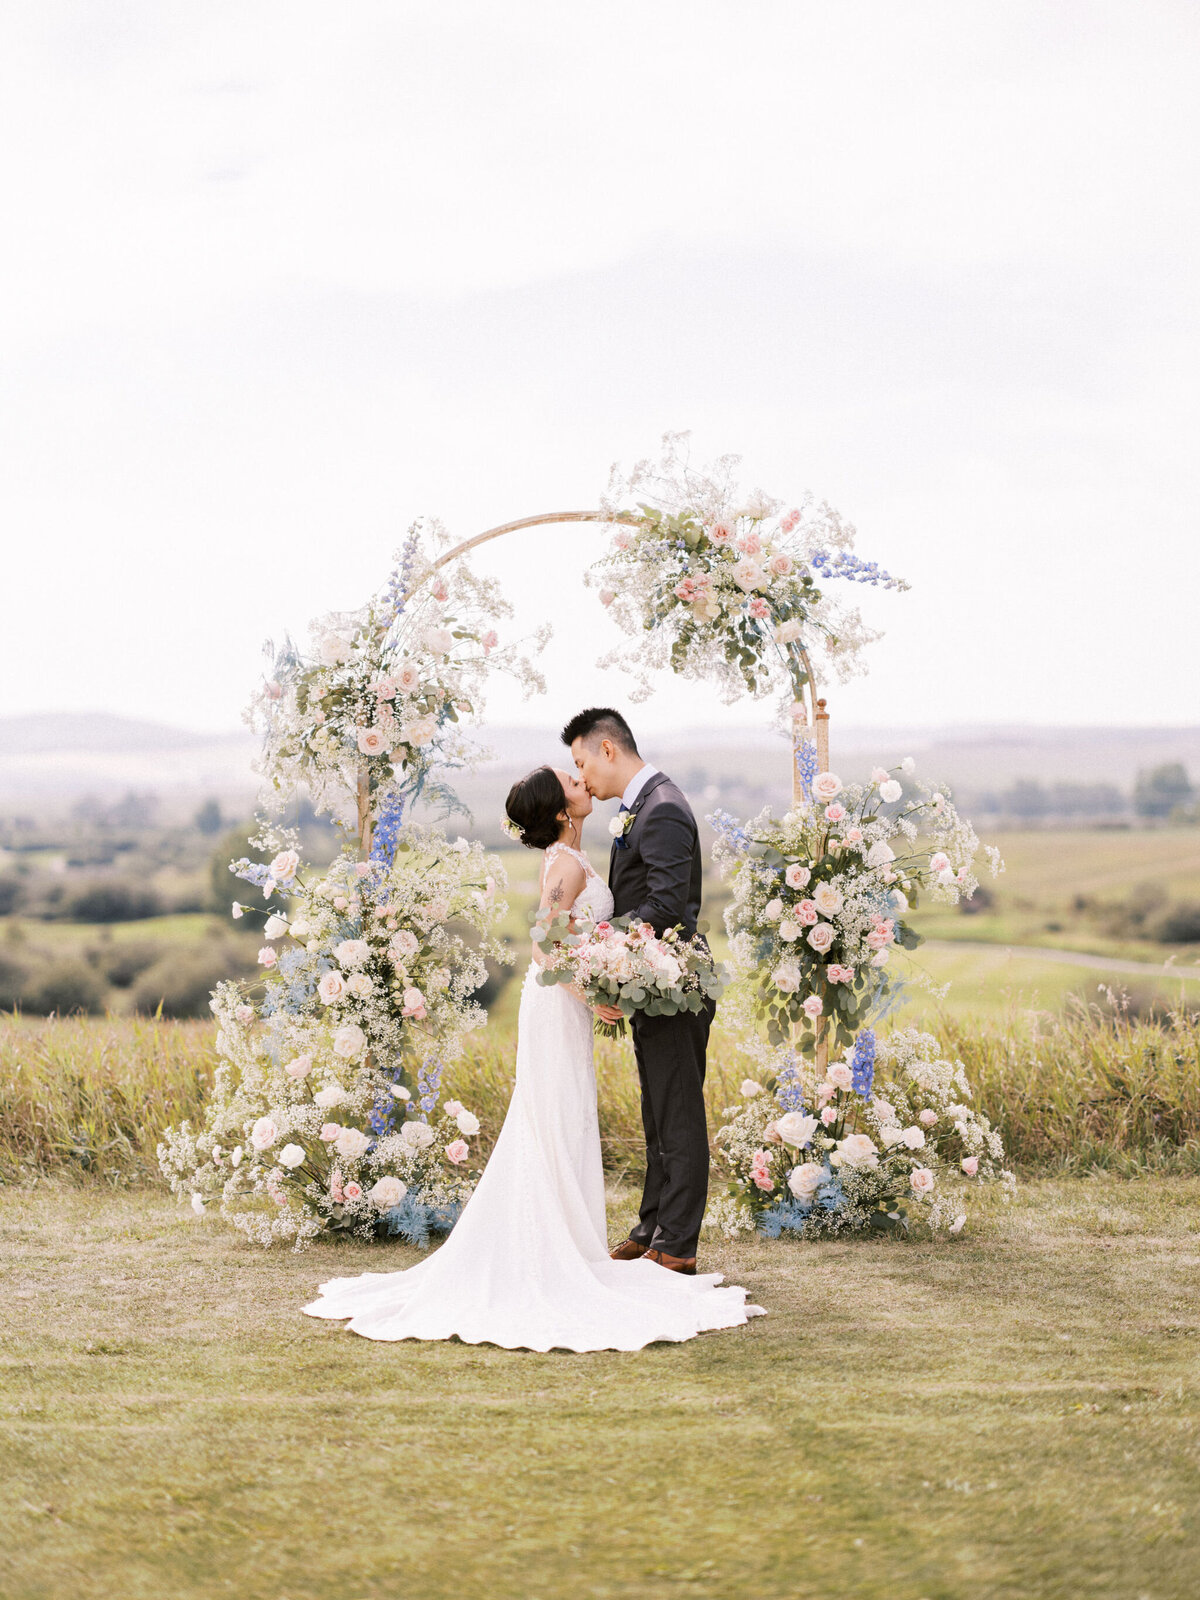 Couple standing in front of elegant ceremony arch, covered in white and blue florals styled by Melissa Dawn Event Designs, a unique and modern wedding planner based in Calgary, Alberta. Featured on the Brontë Bride Vendor Guide.